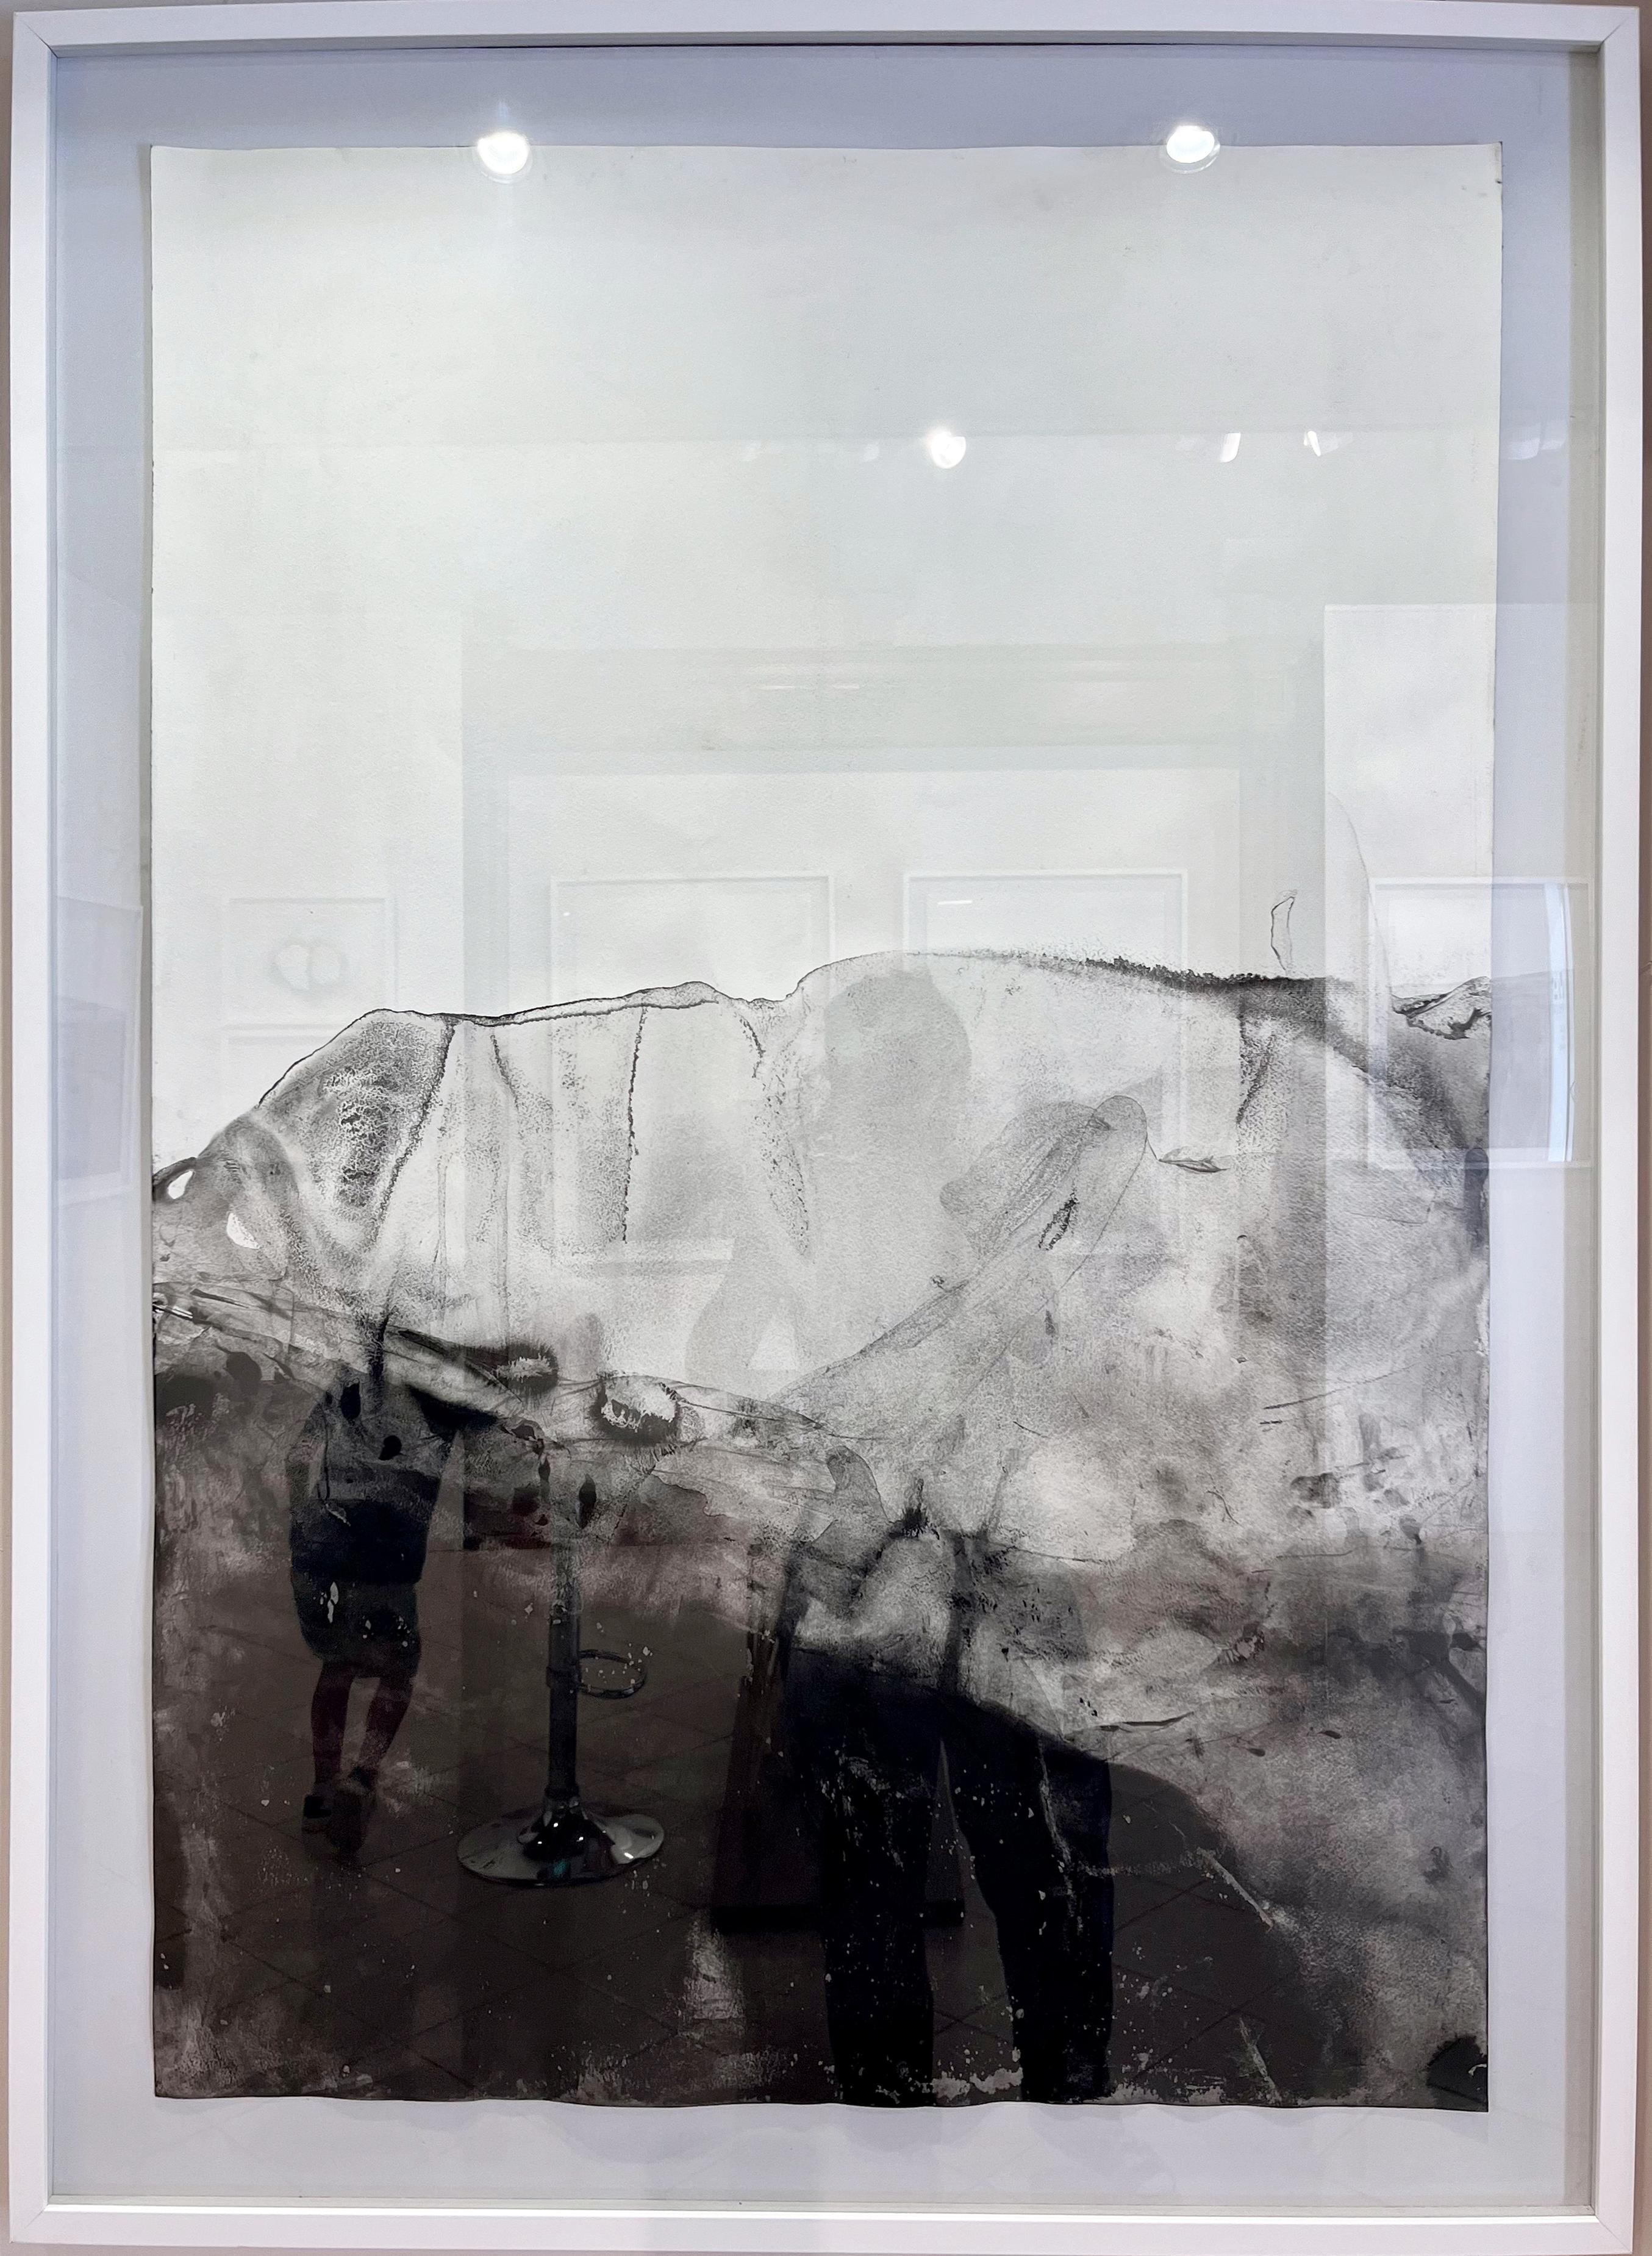  Landscape BW

Mineral Oxide on Canson Paper (300gr)
75x110 cm
framed SIZE
92x122cm

Ready to Hang

this painting is published in the personal exhibition catalogue
